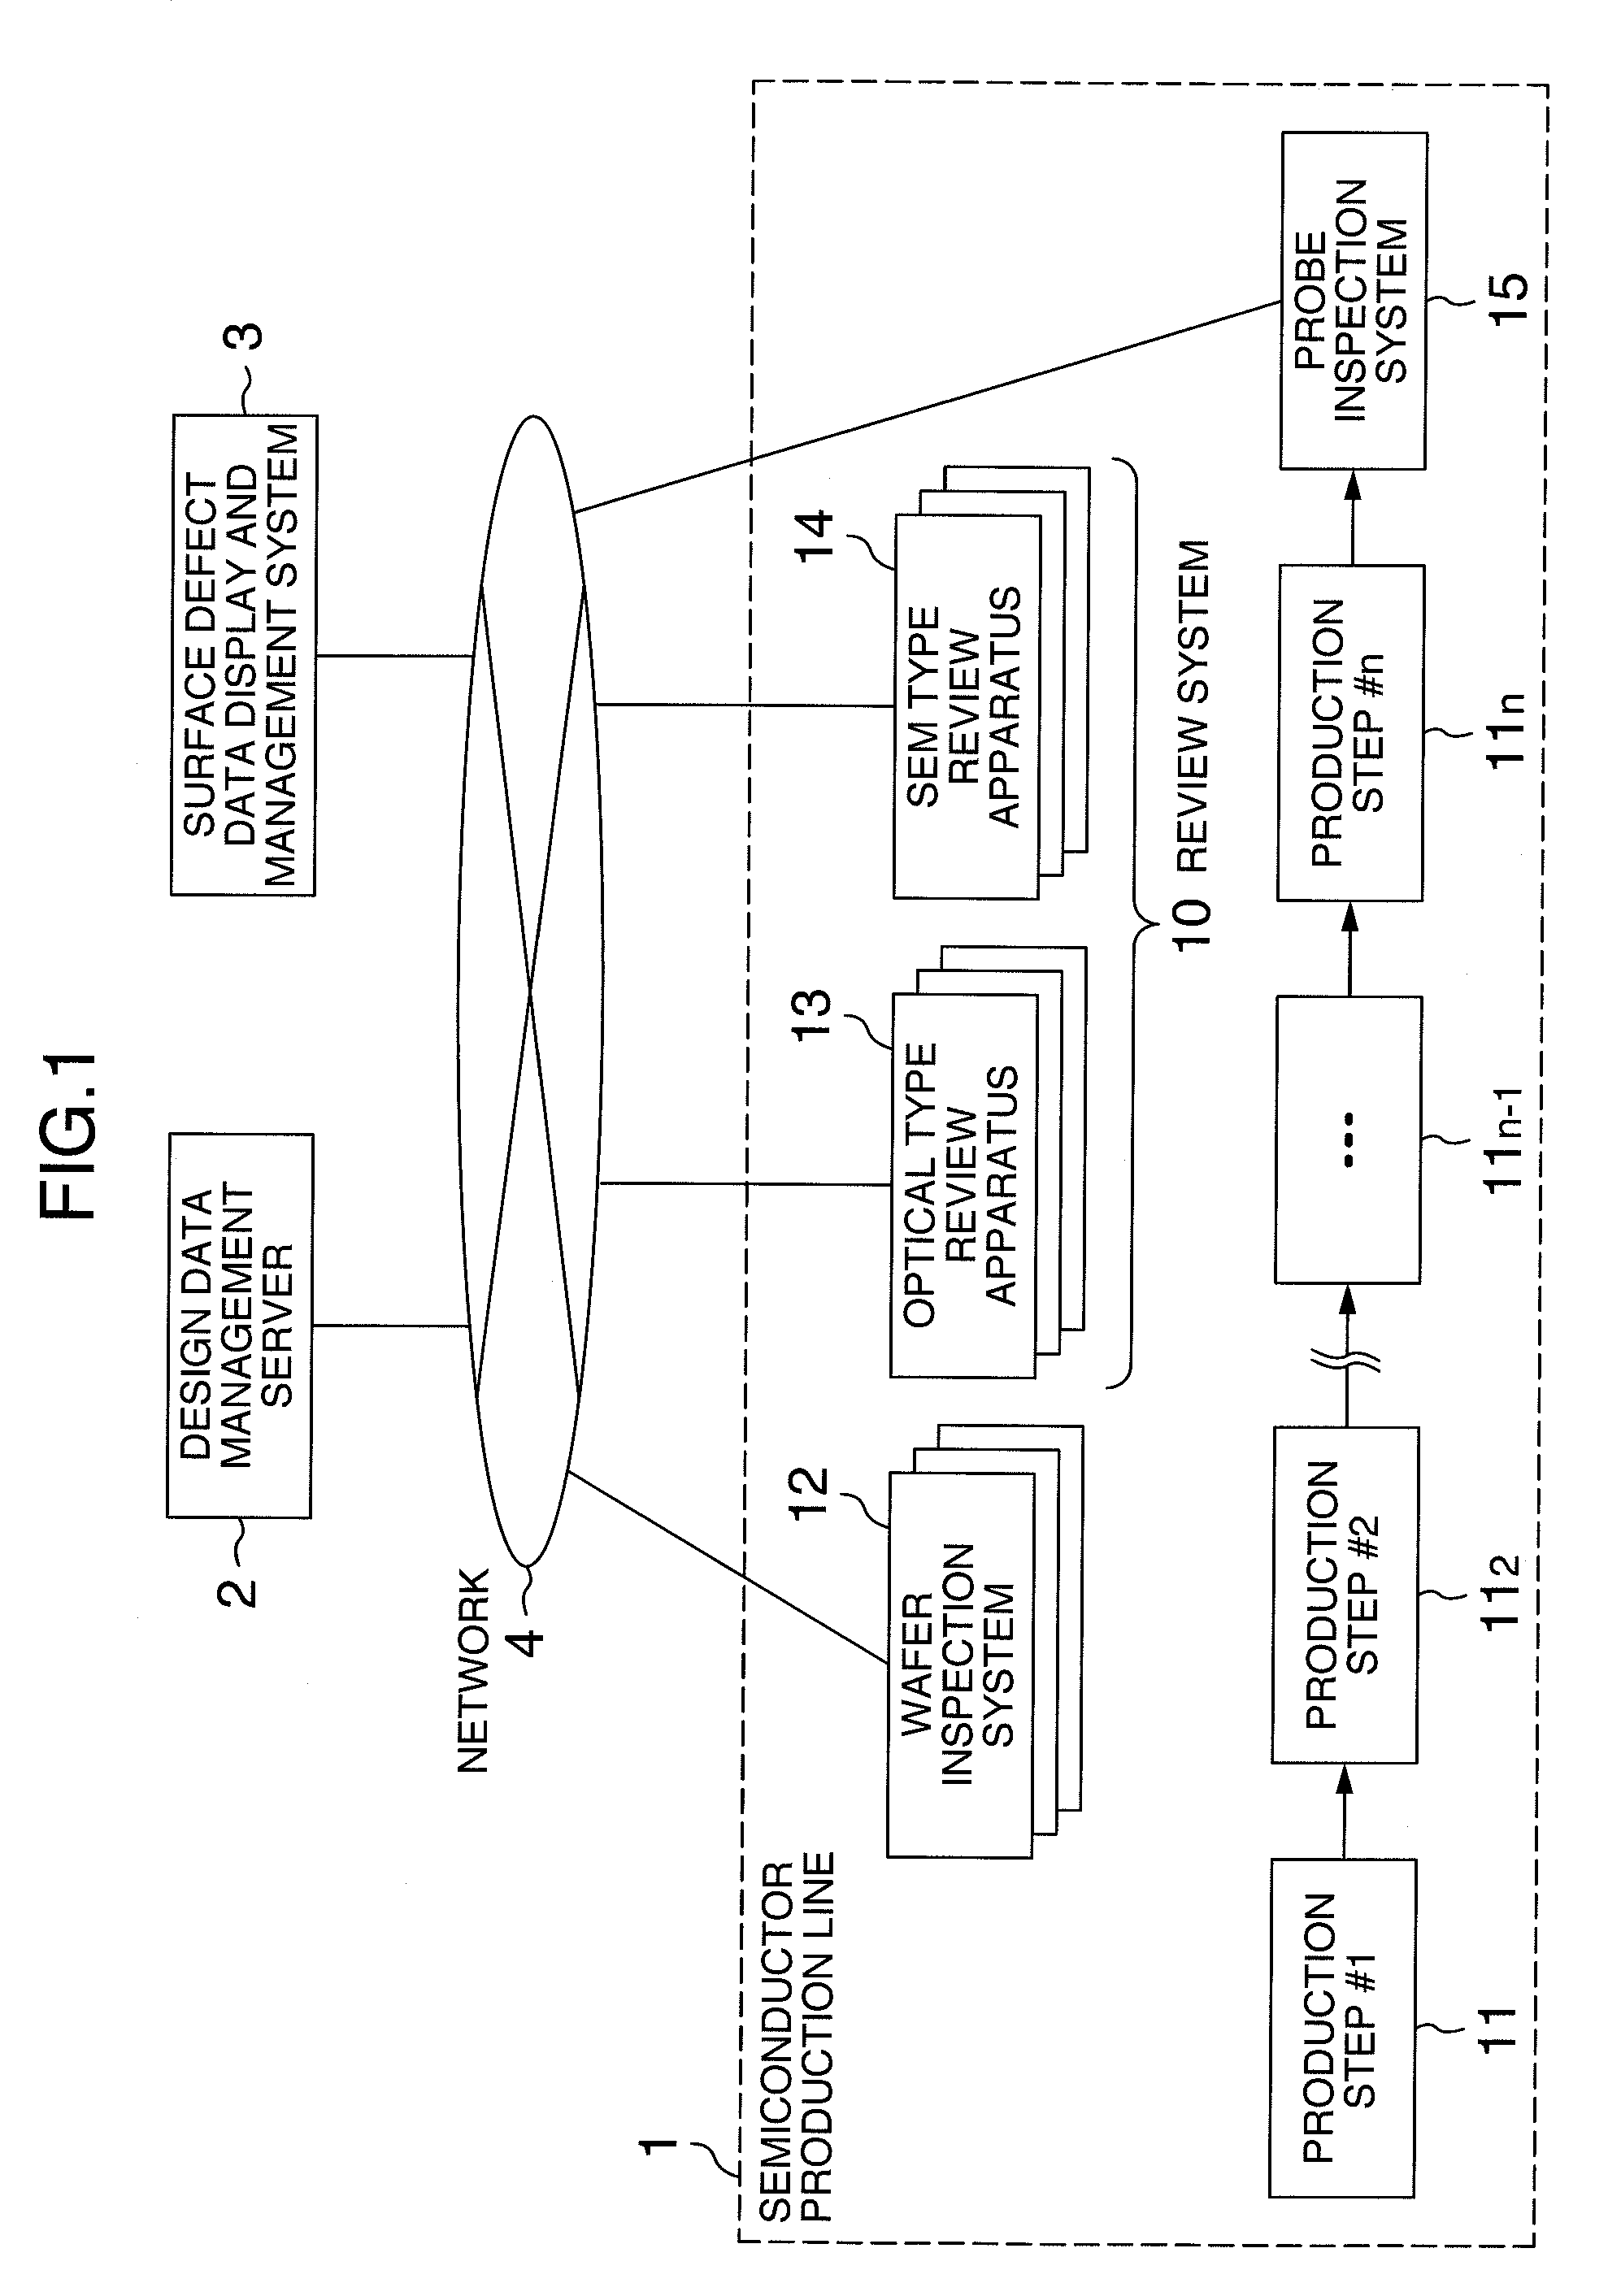 Surface defect data display and management system and a method of displaying and managing a surface defect data